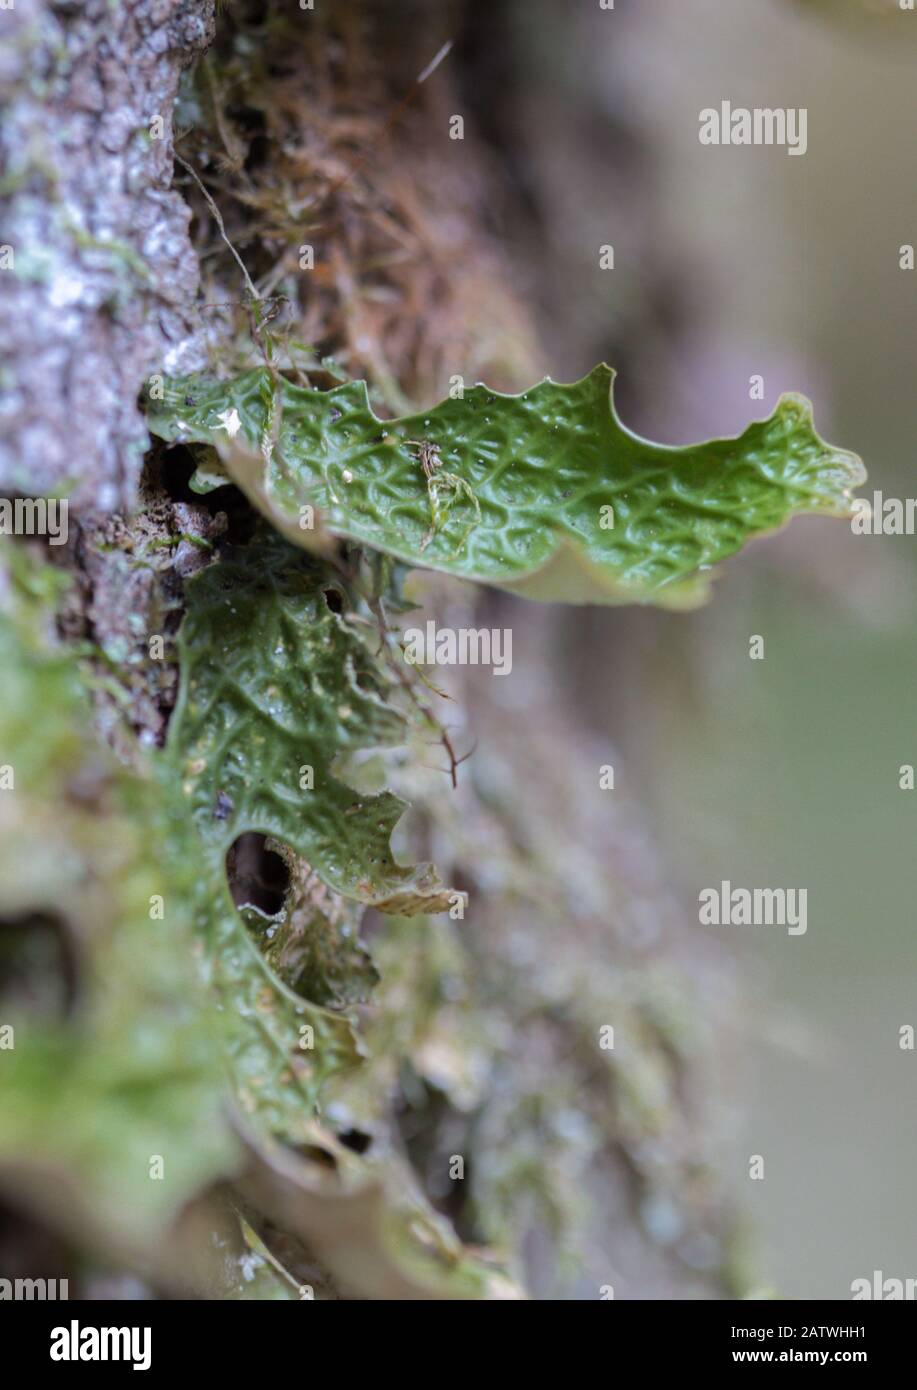 Lobaria pulmonaria, or oak lungwort rare lichens in the primary beech forest that growing on the bark old trees Stock Photo